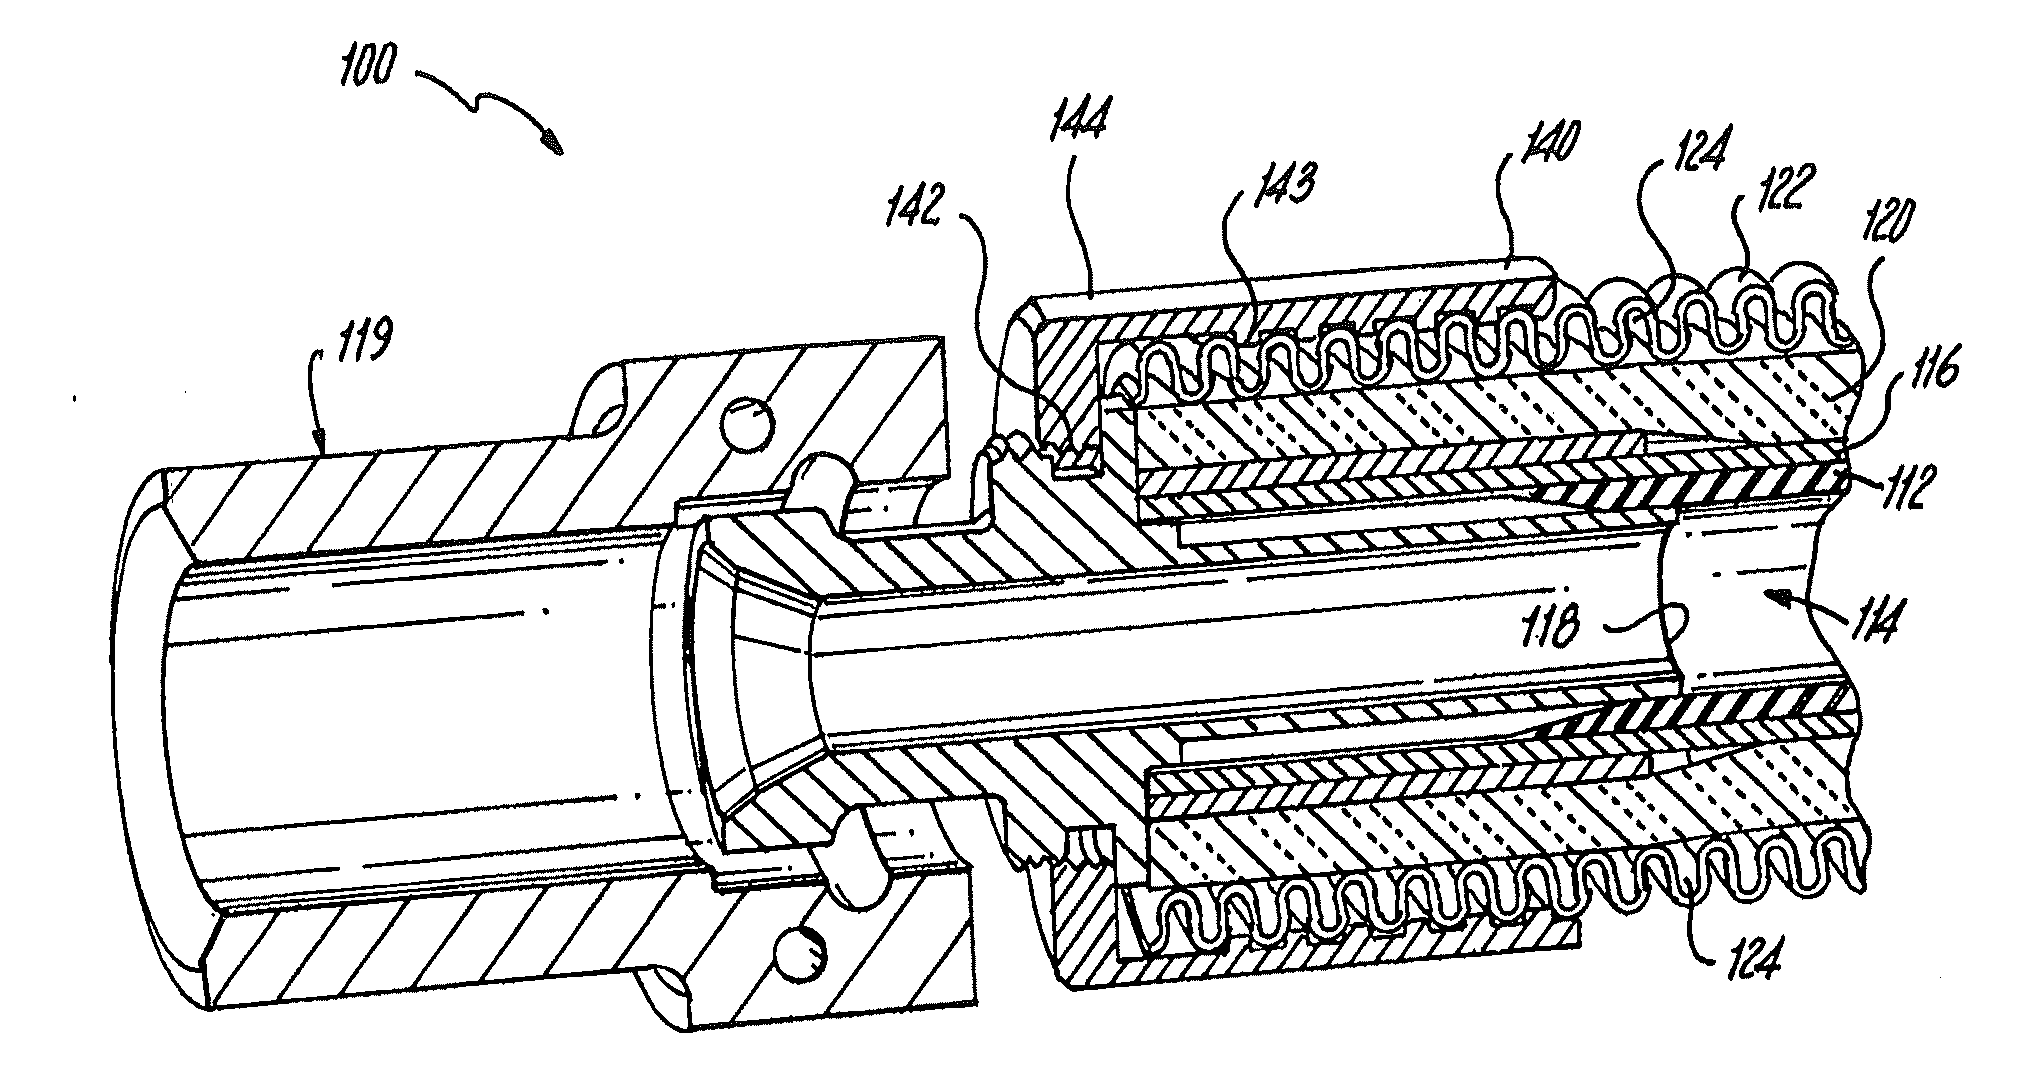 High temperature fuel manifold for gas turbine engines